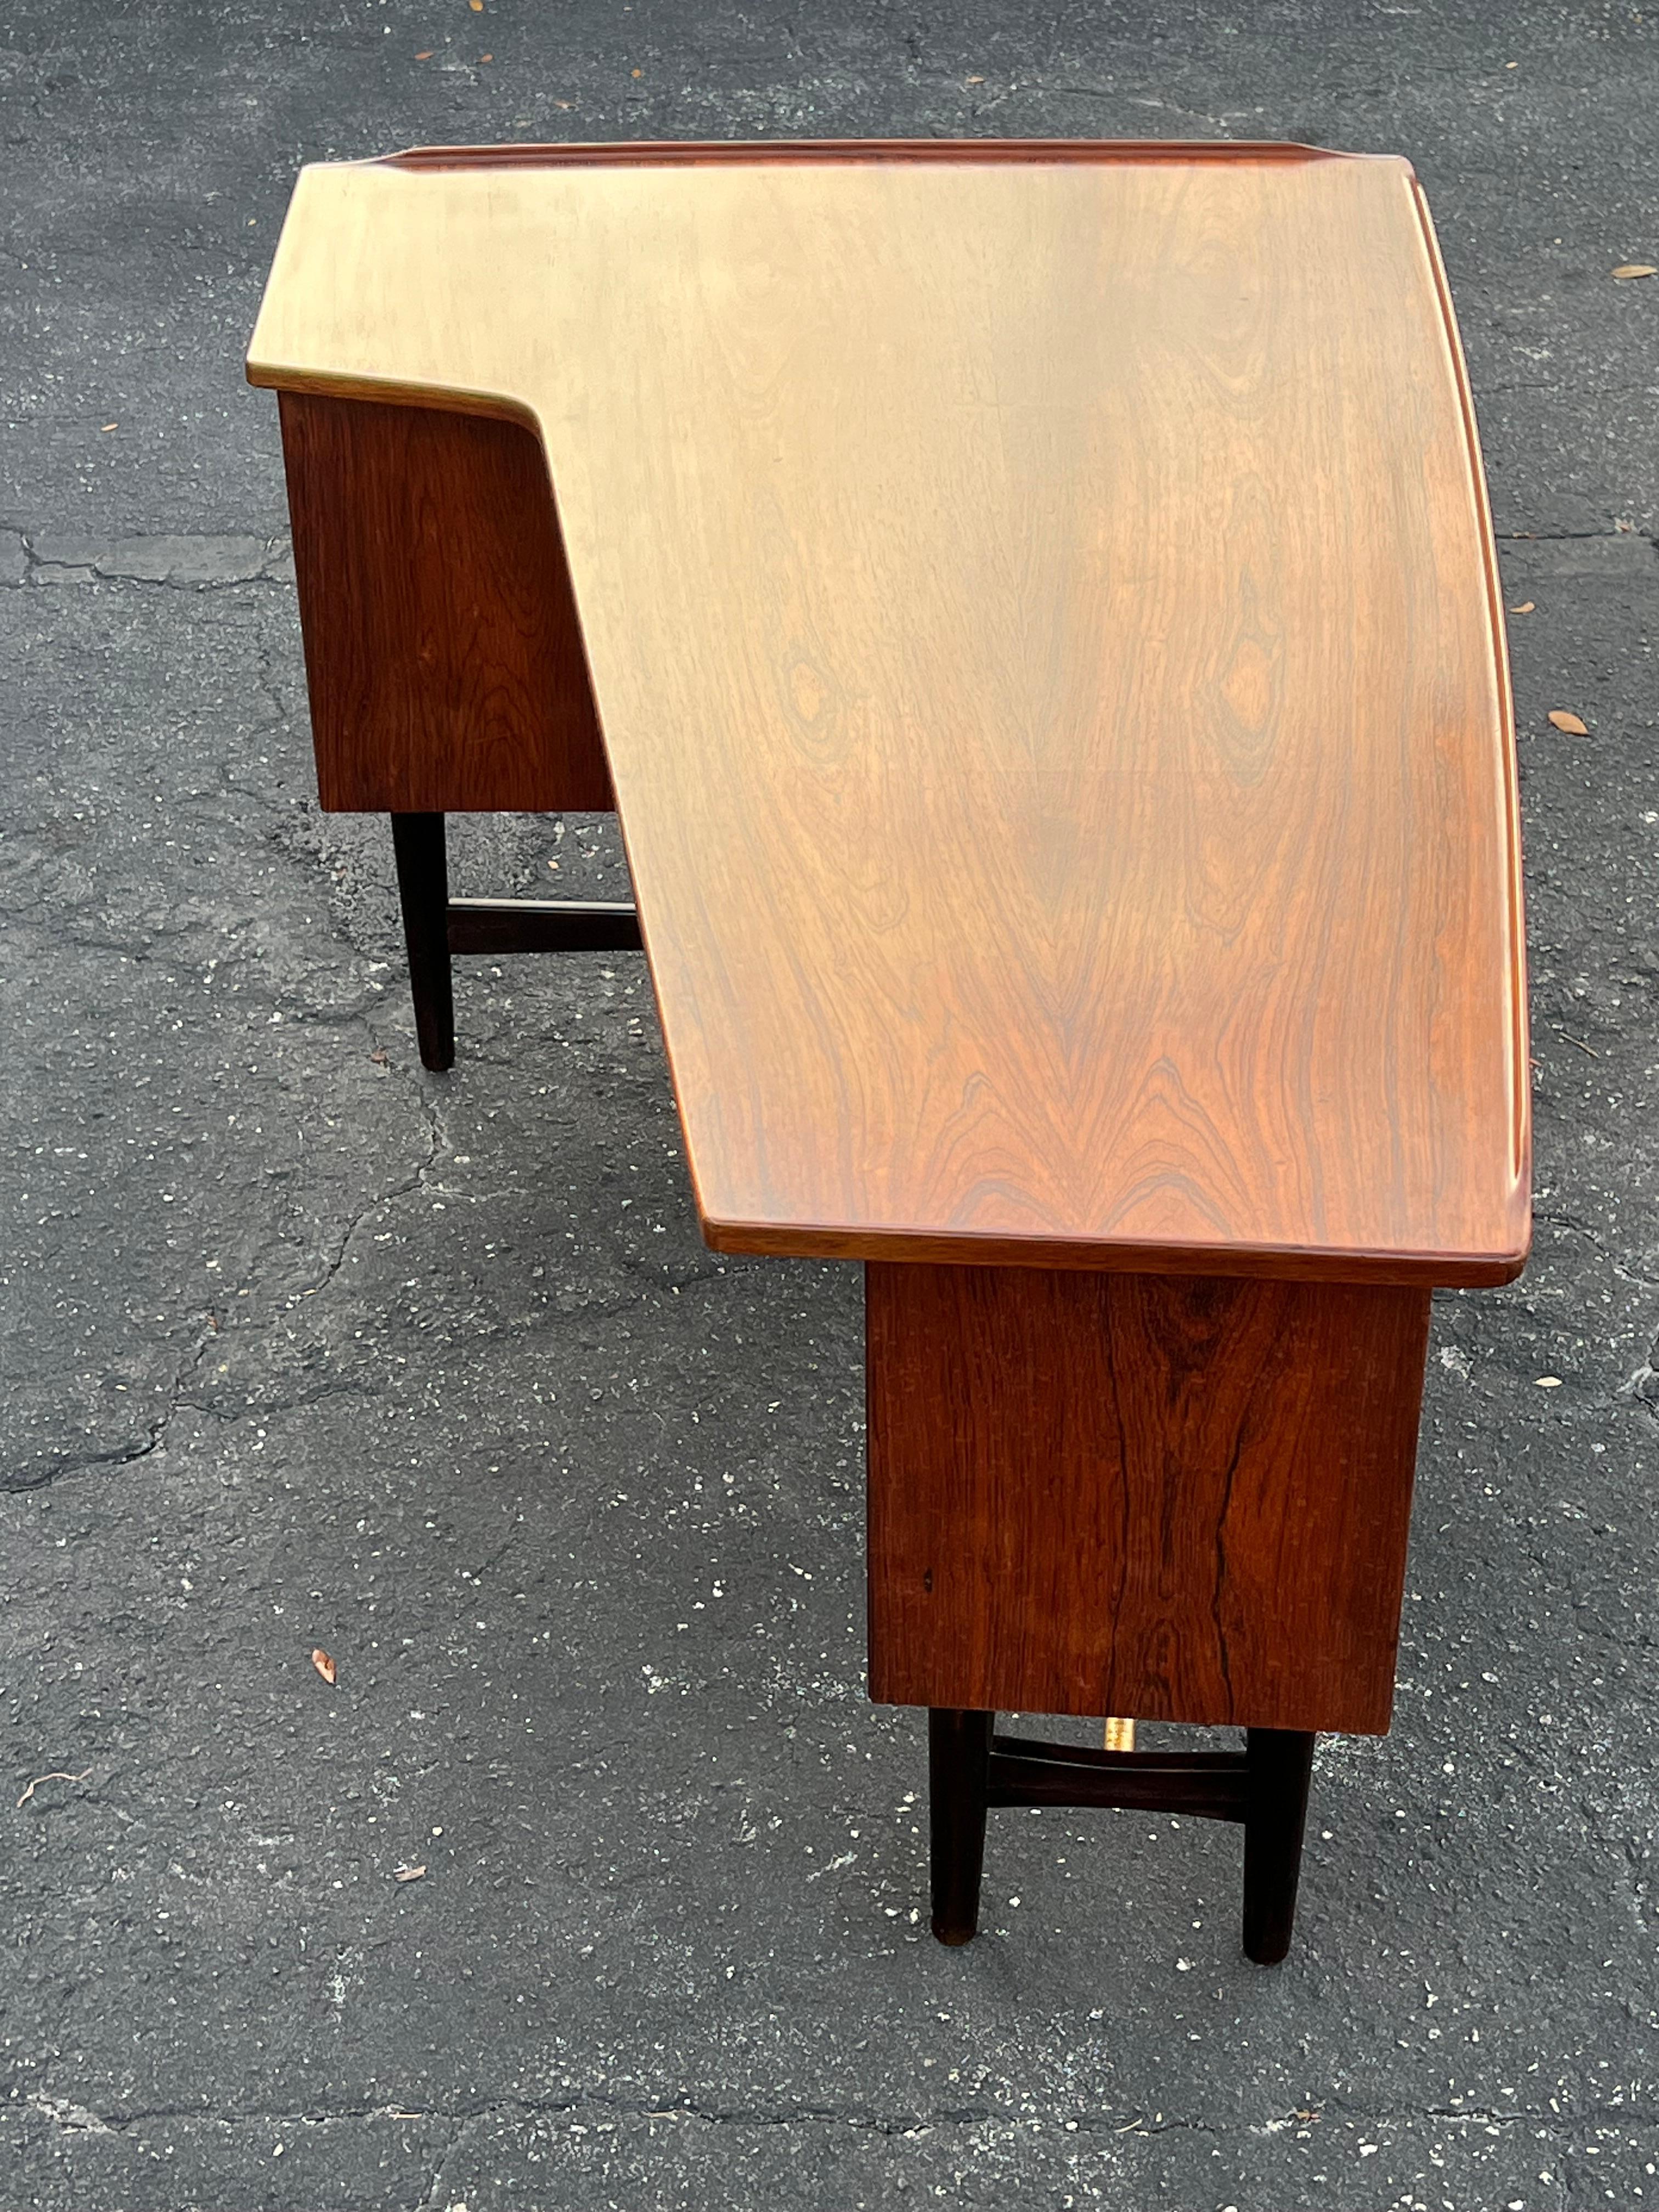 Beautiful  ‘Boomerang’ desk designed by Peter Løvig Nielsen and produced by Løvig in Denmark, 1960s. A highly refined design with great details such as the shape of the top with sculpted, raised edges. This desk is made of nicely grained Brazilian